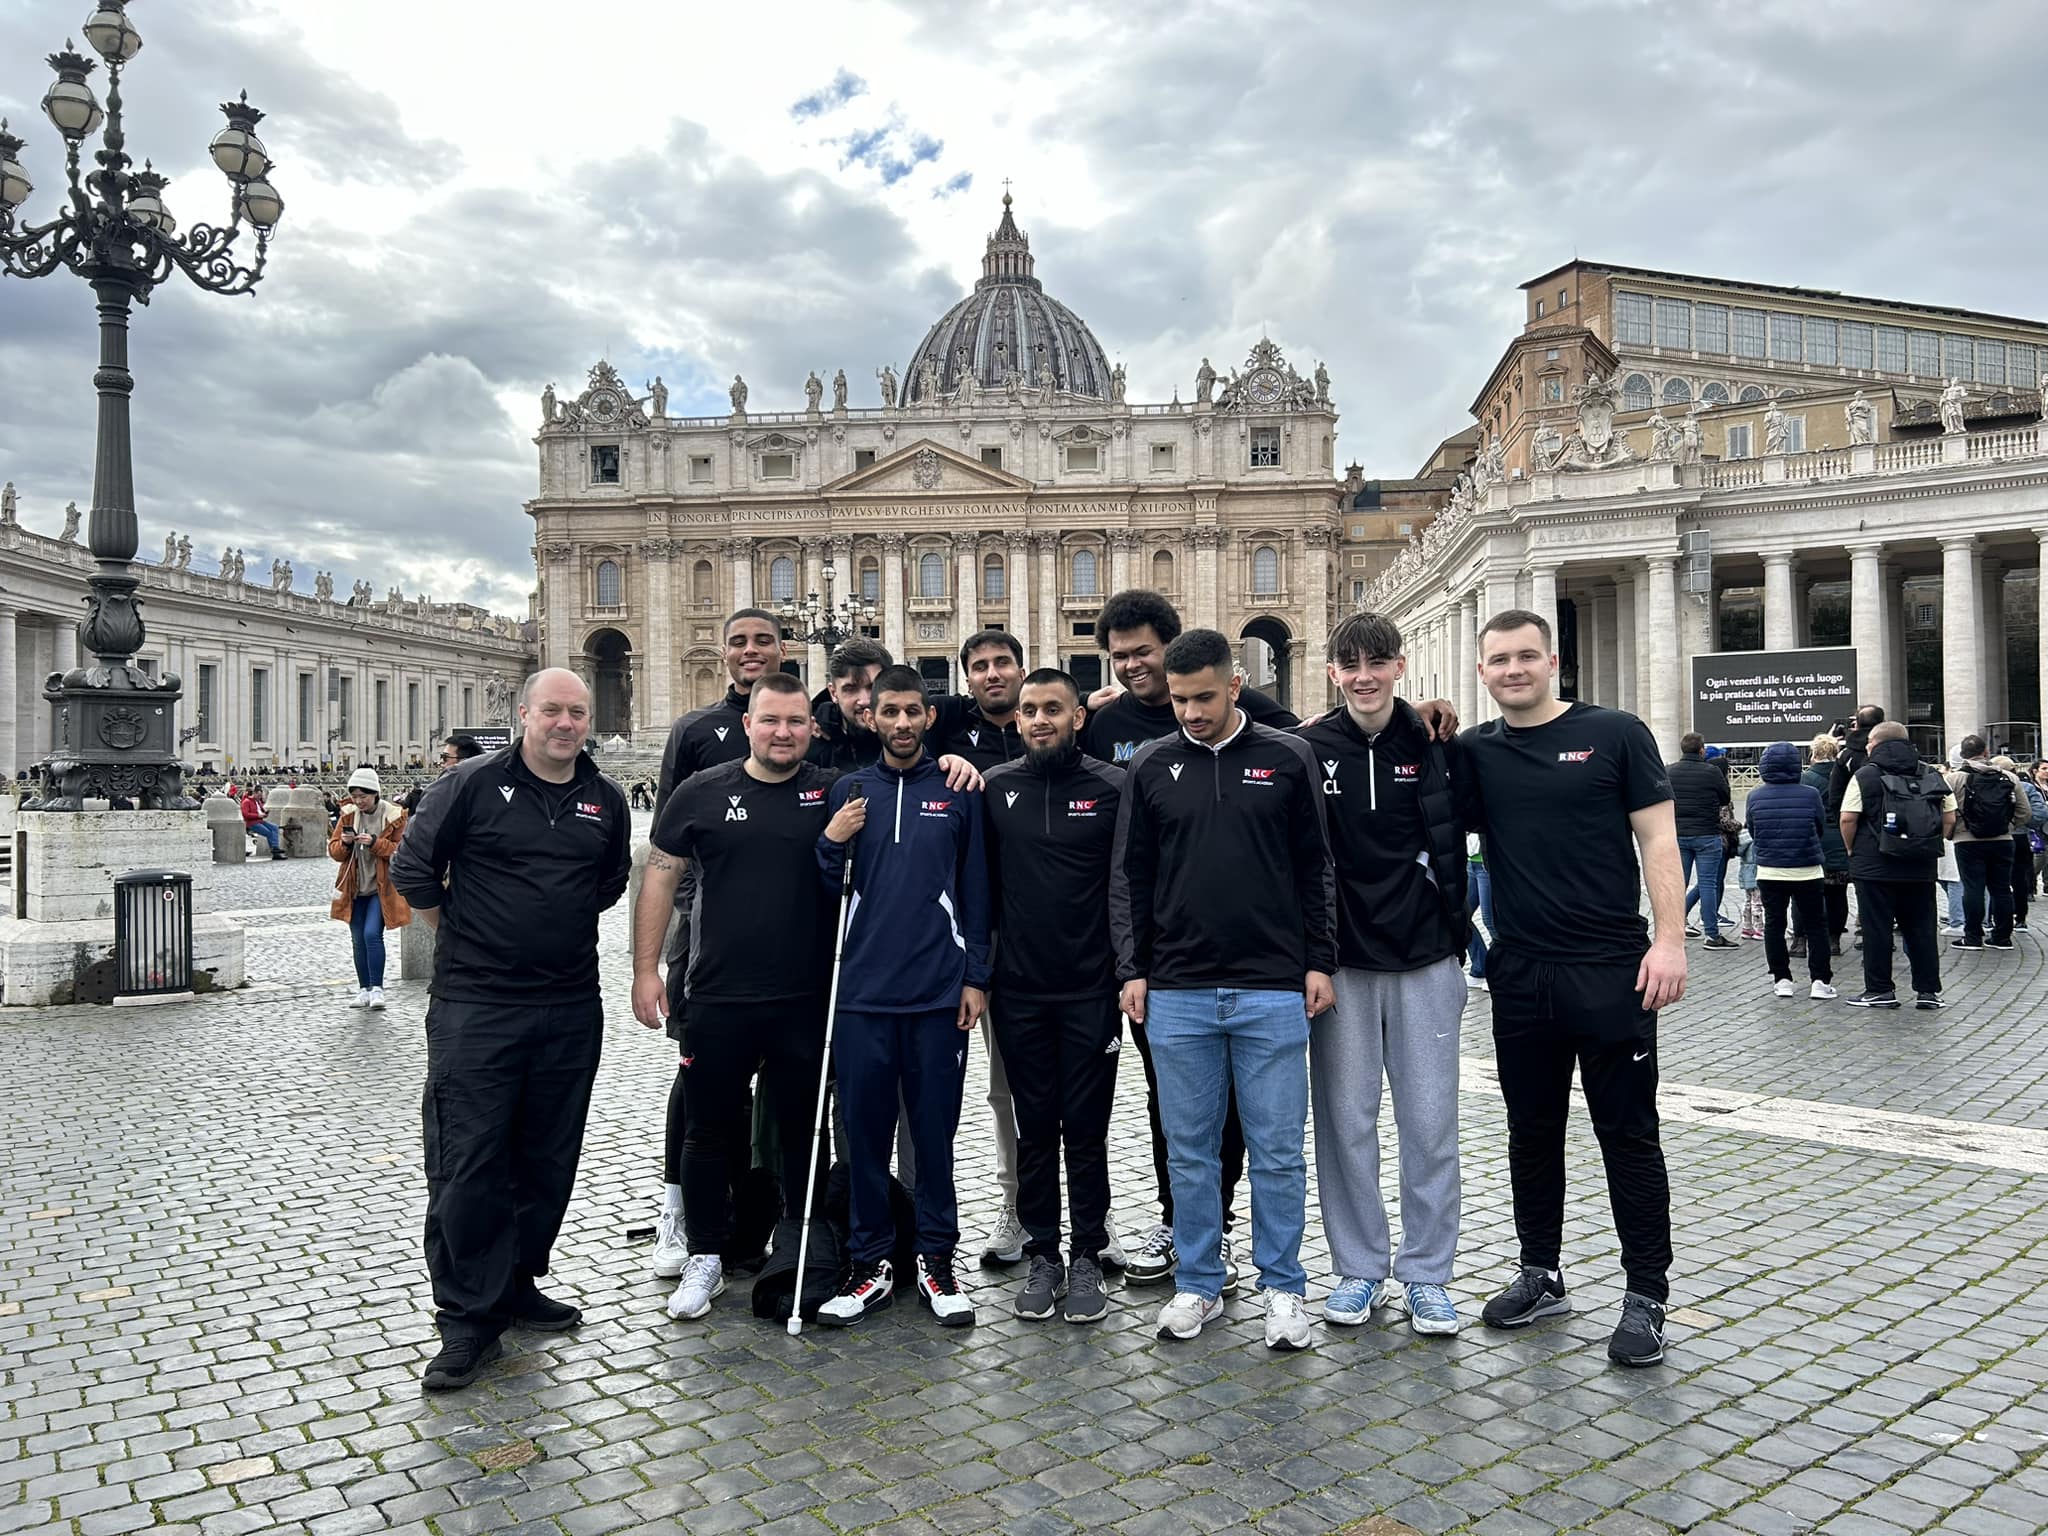 the RNC team standing in St Peter's Square in Vatican City